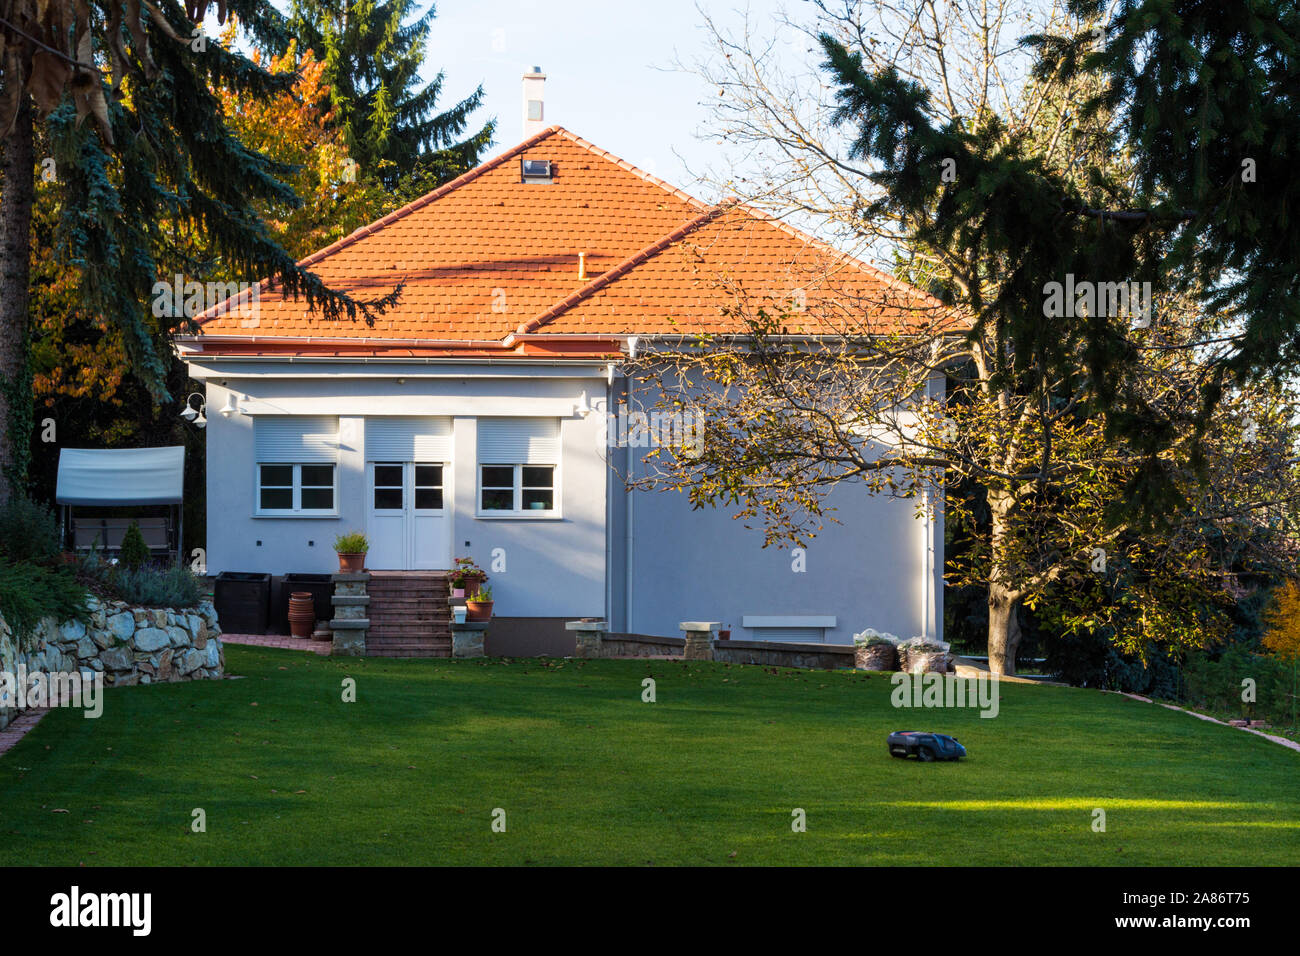 Robot robotic lawn mower mowing grass in garden of house, Sopron, Hungary Stock Photo